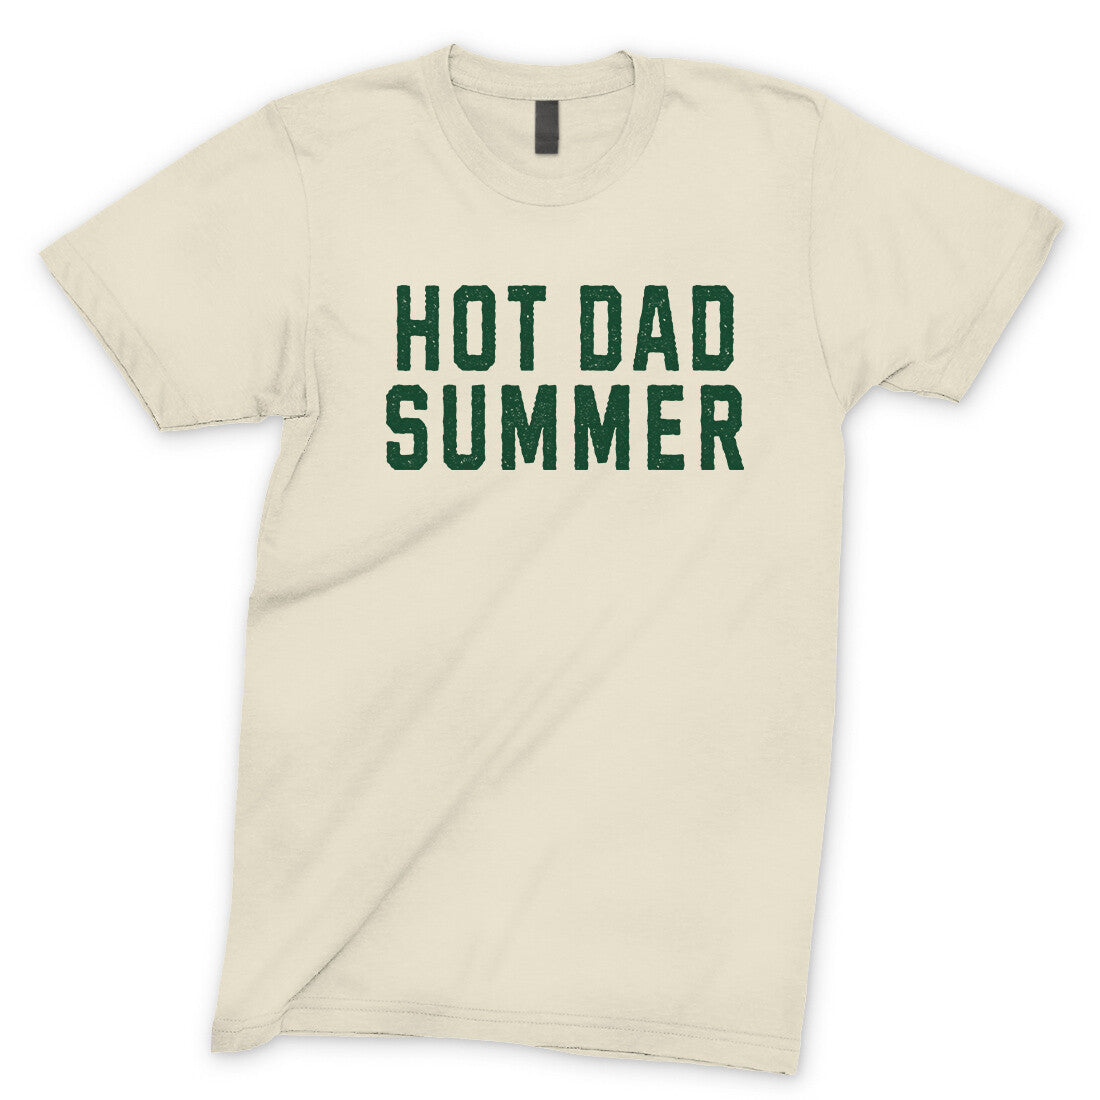 Hot Dad Summer in Natural Color